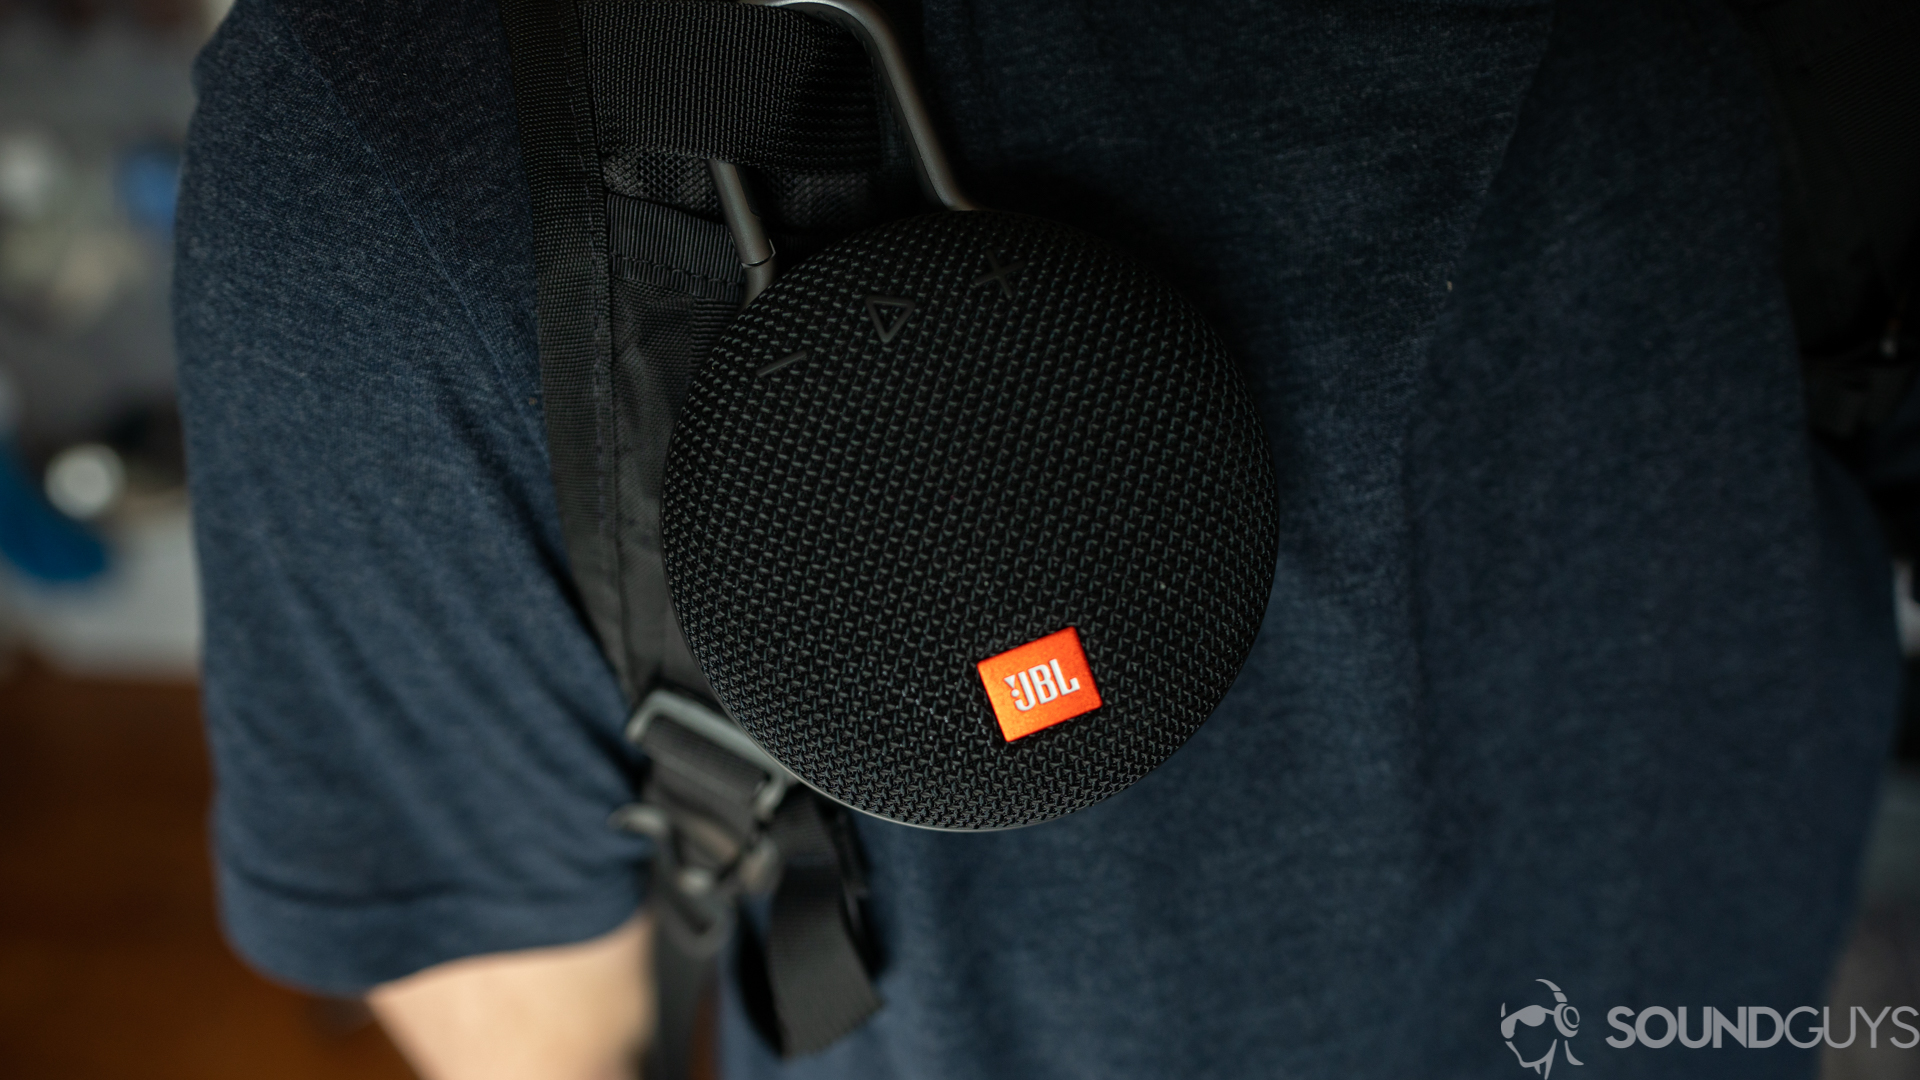 Pictured is the JBL Clip 3 attached to a backpack strap.